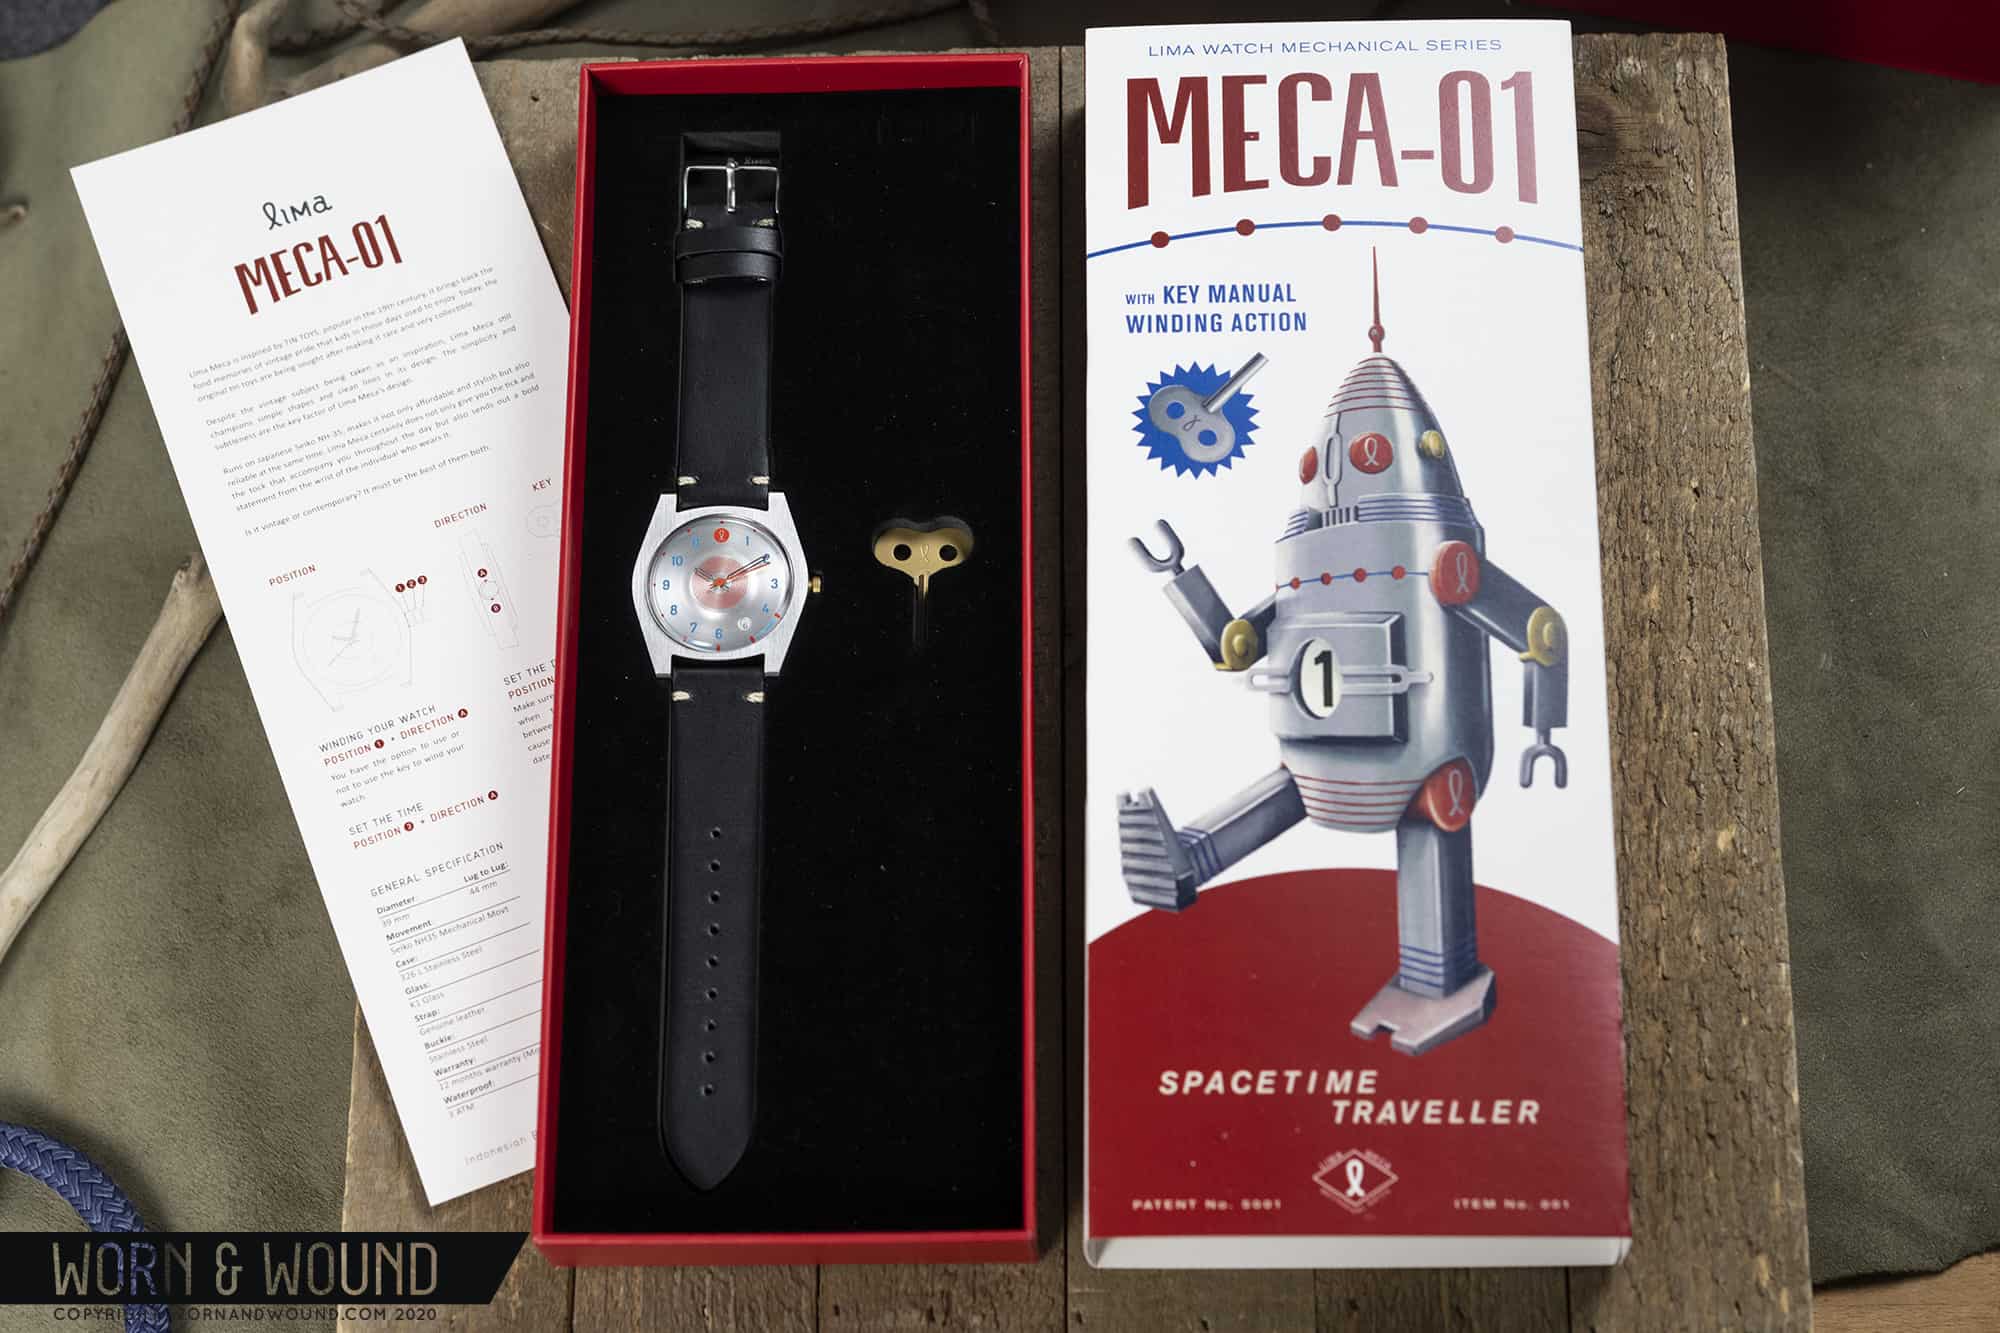 Hands-On With The Curiously Creative Lima Watch Meca-01